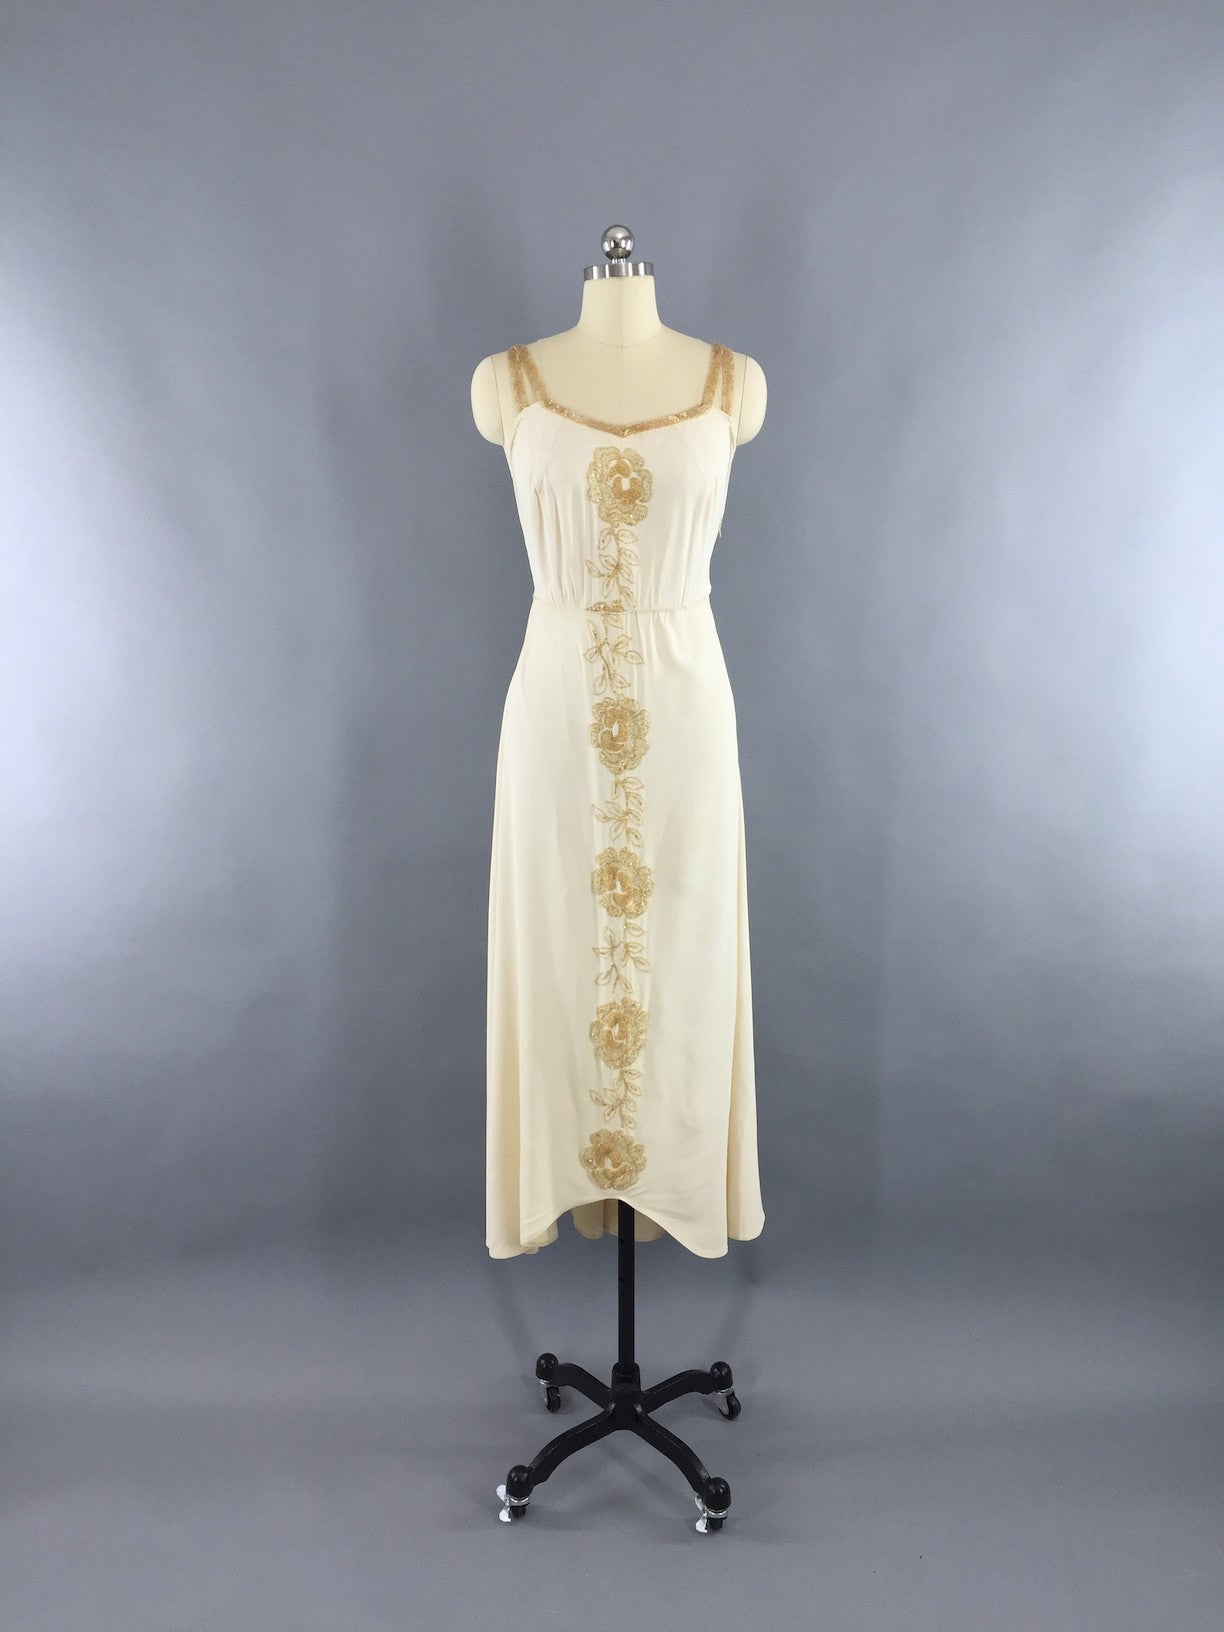 Vintage 1930s Beaded Dress / Gold & Ivory Evening Gown - ThisBlueBird